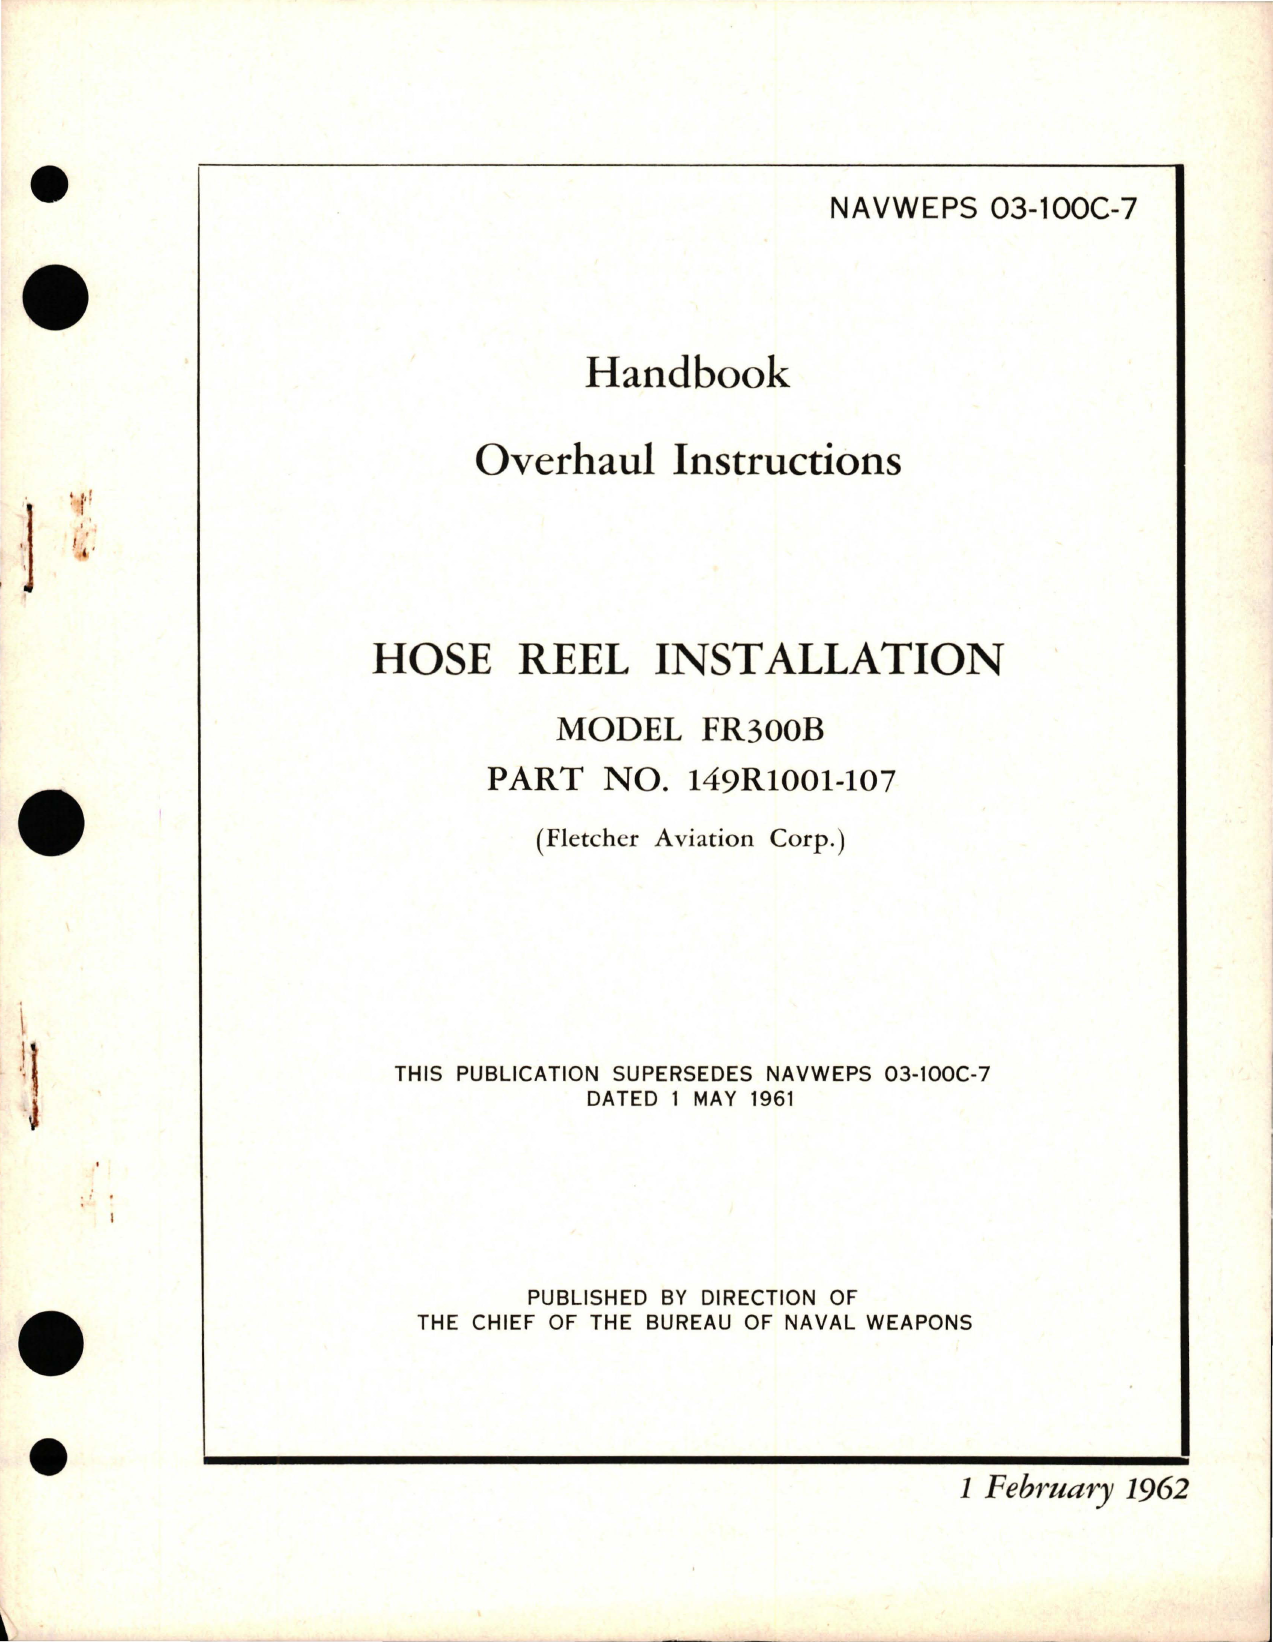 Sample page 1 from AirCorps Library document: Overhaul Instructions for Hose Reel Installation - Model FR300B - Part 149R1001-107